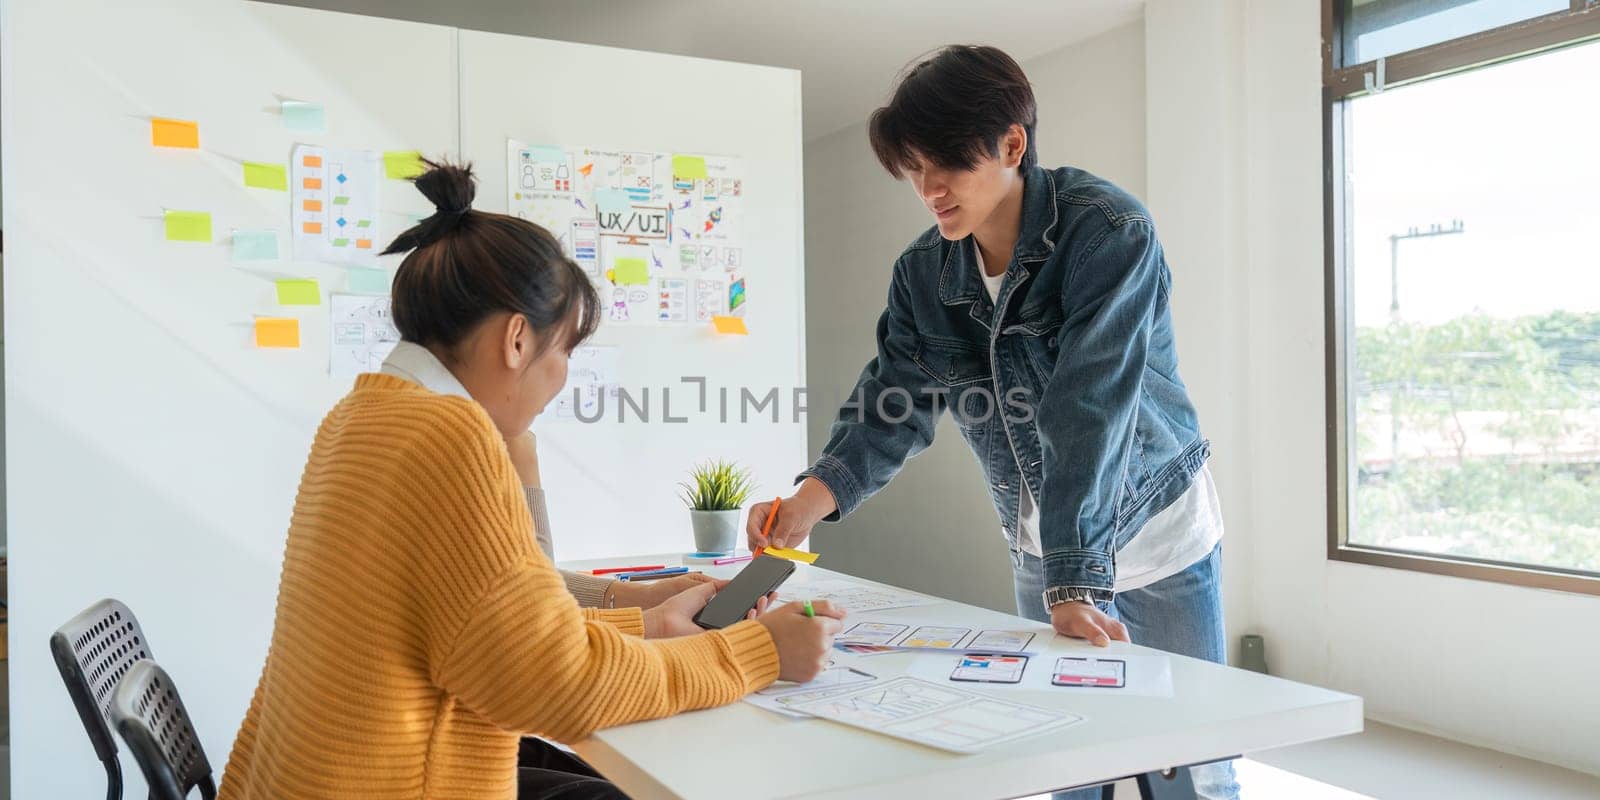 Ux developer and ui designer use augmented reality brainstorming about mobile app interface wireframe design on desk at modern office. creative digital development agency.